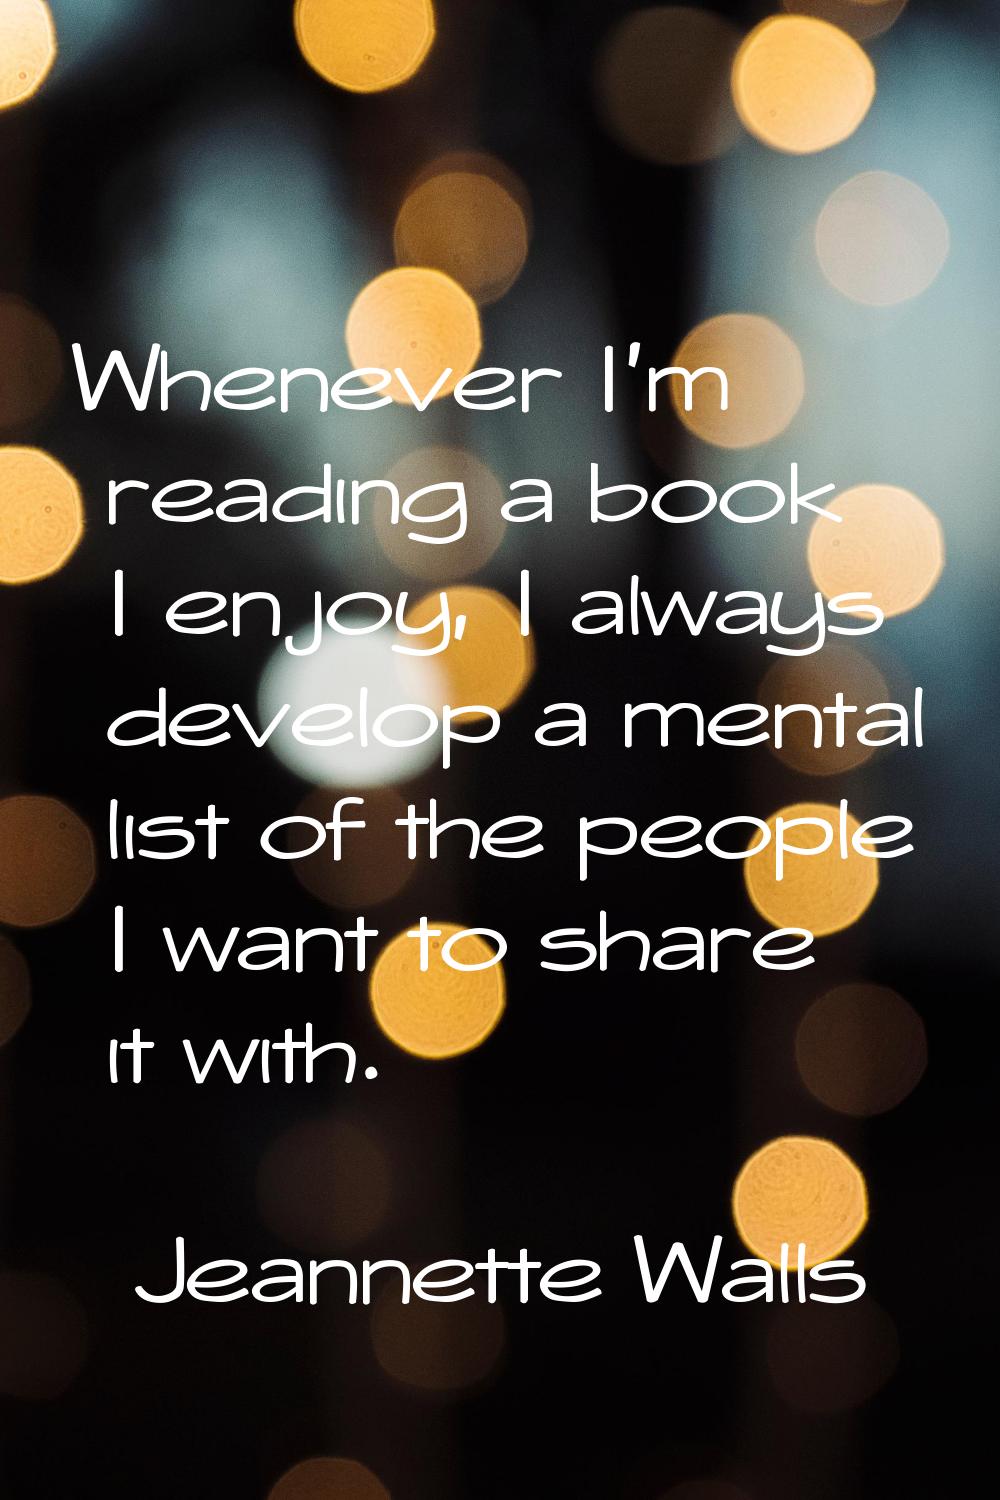 Whenever I'm reading a book I enjoy, I always develop a mental list of the people I want to share i